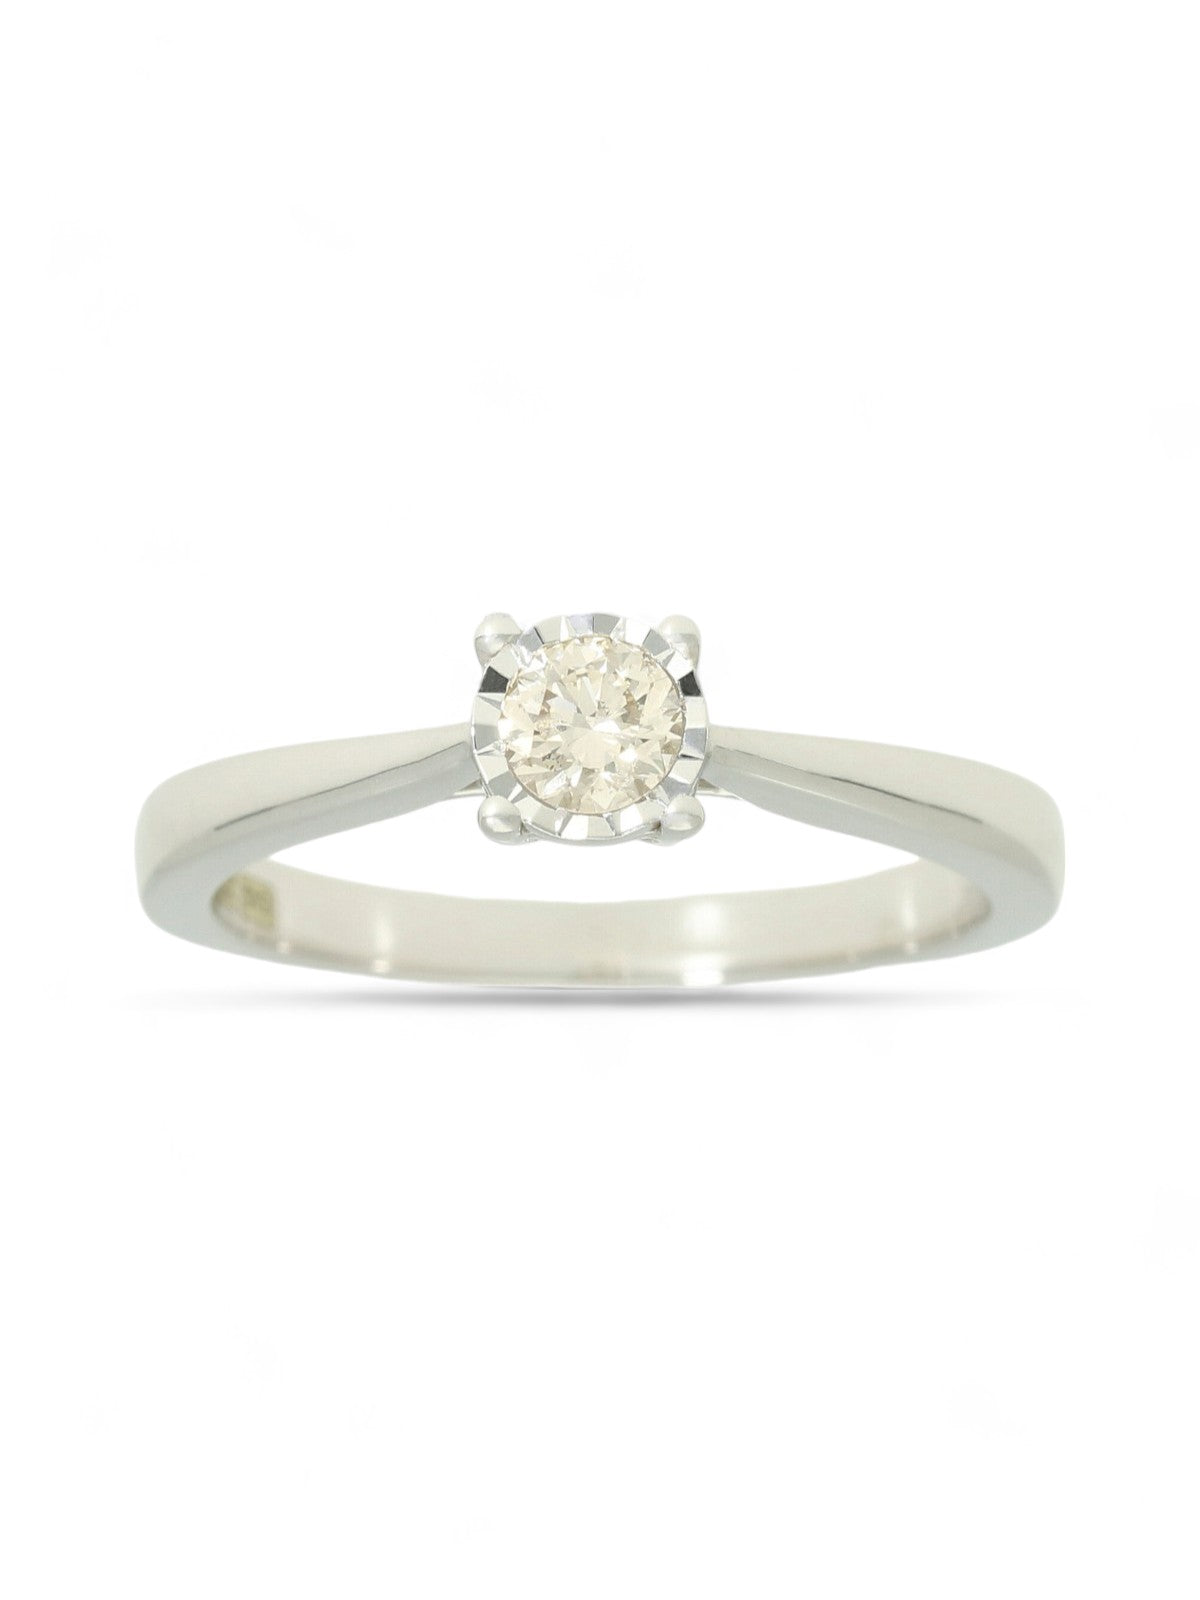 Diamond Solitaire Miracle Set Engagement Ring 0.25ct Round Brilliant Cut in 9ct White Gold